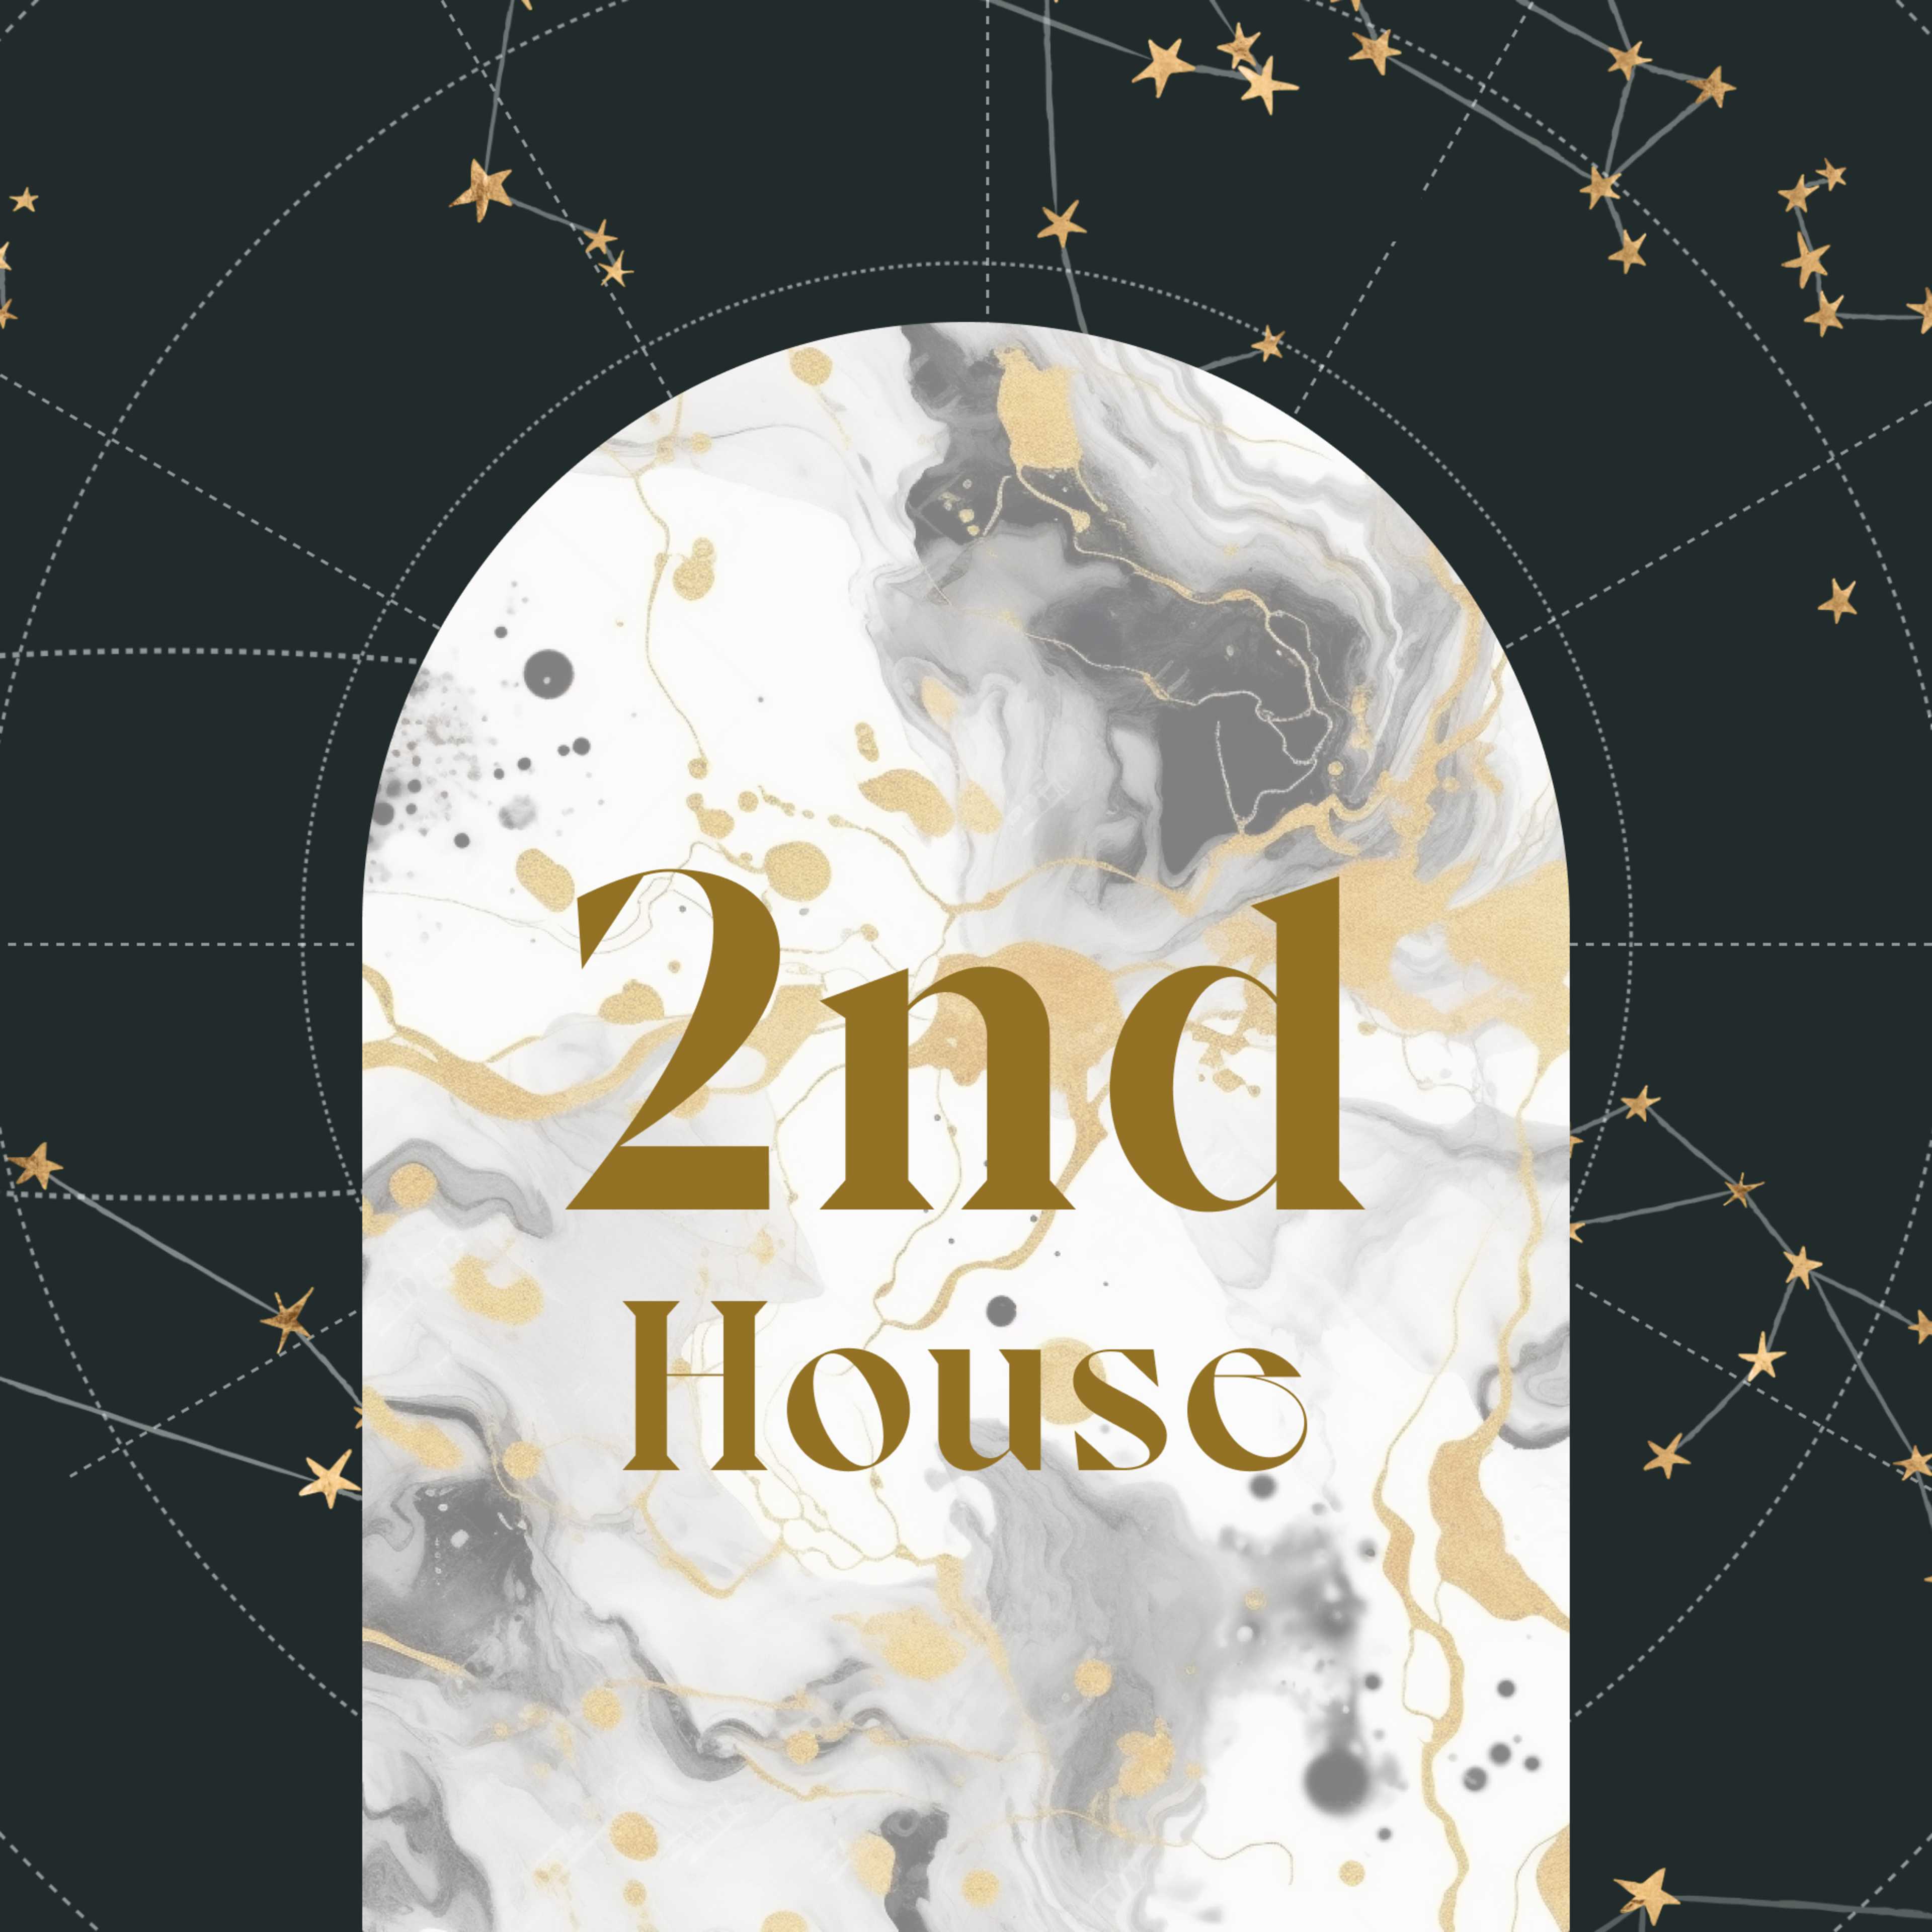 Second House in Astrology